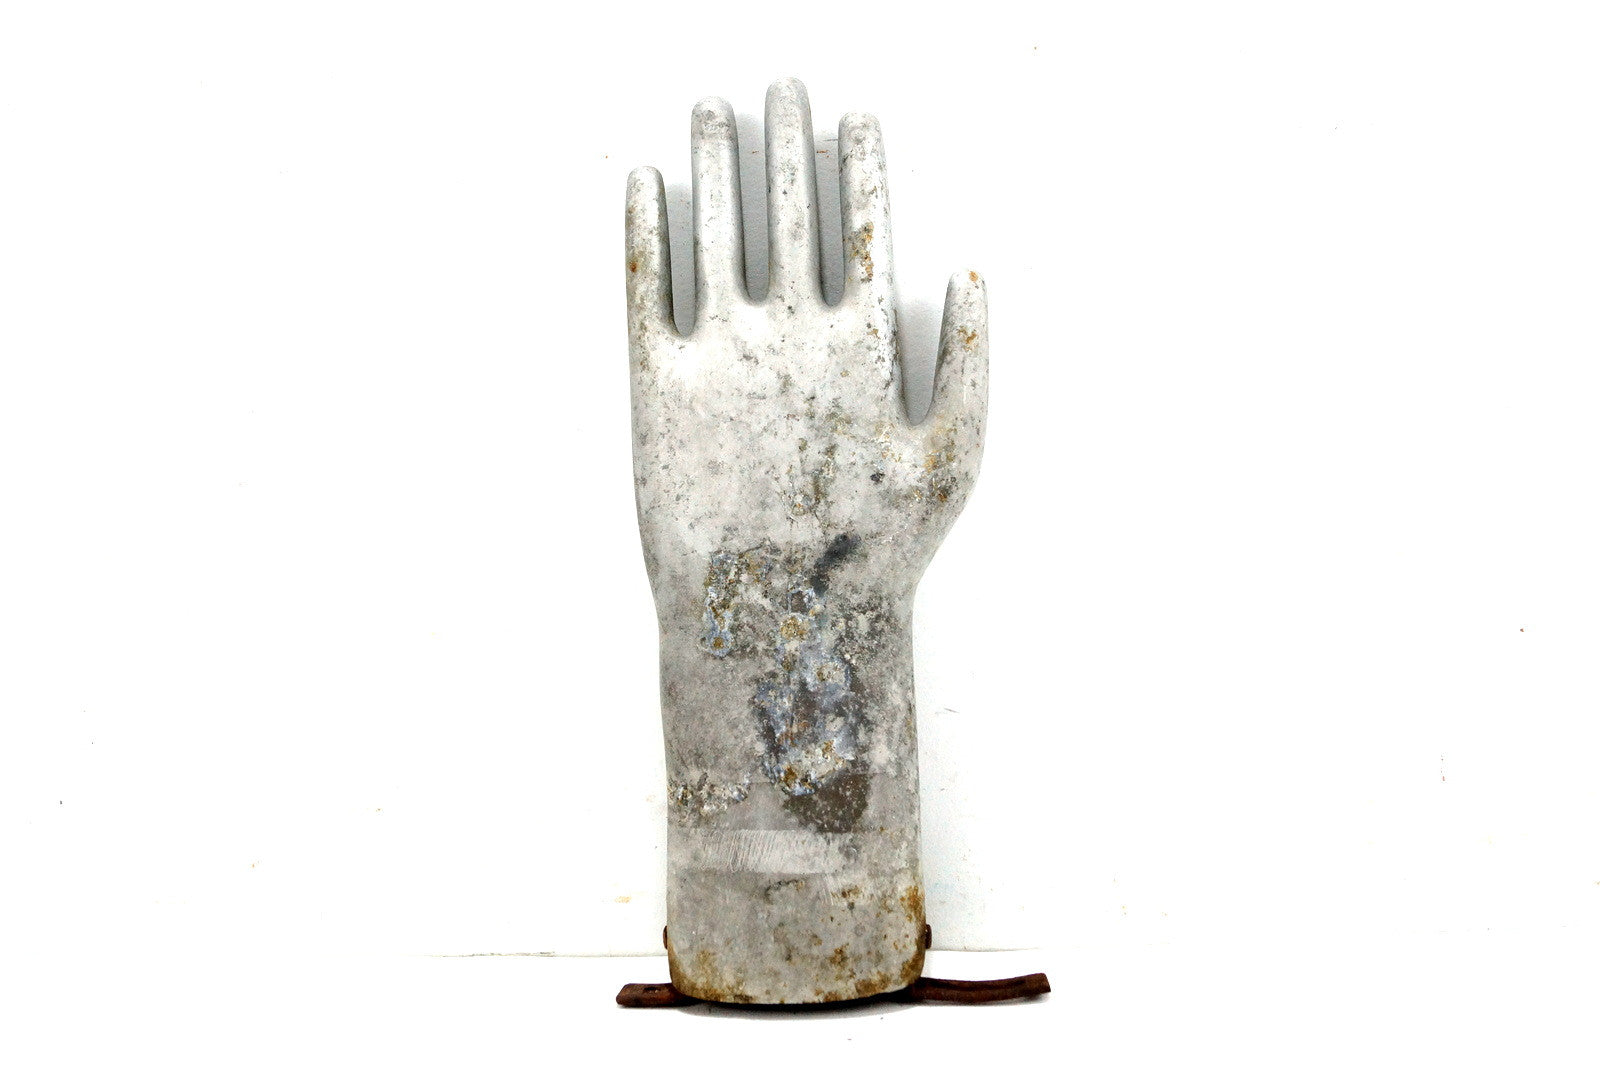 Vintage Aluminum Glove Mold, Silver Metal Hand, 13 inches tall (c.1970 ...